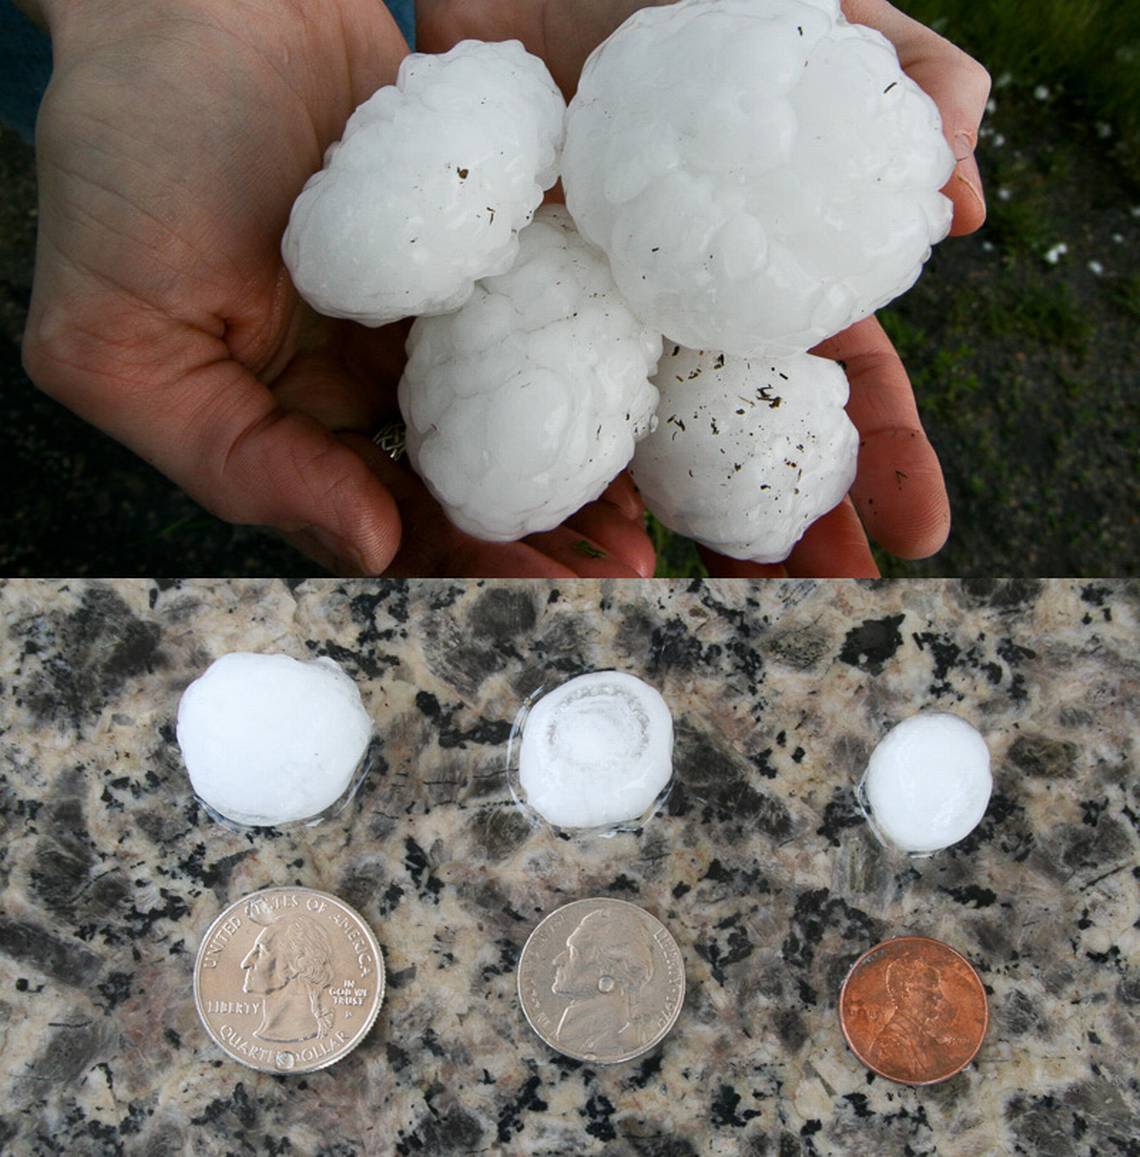 Weather update: Softball-sized hail pounds Hood County, tornado watch includes Tarrant, Dallas